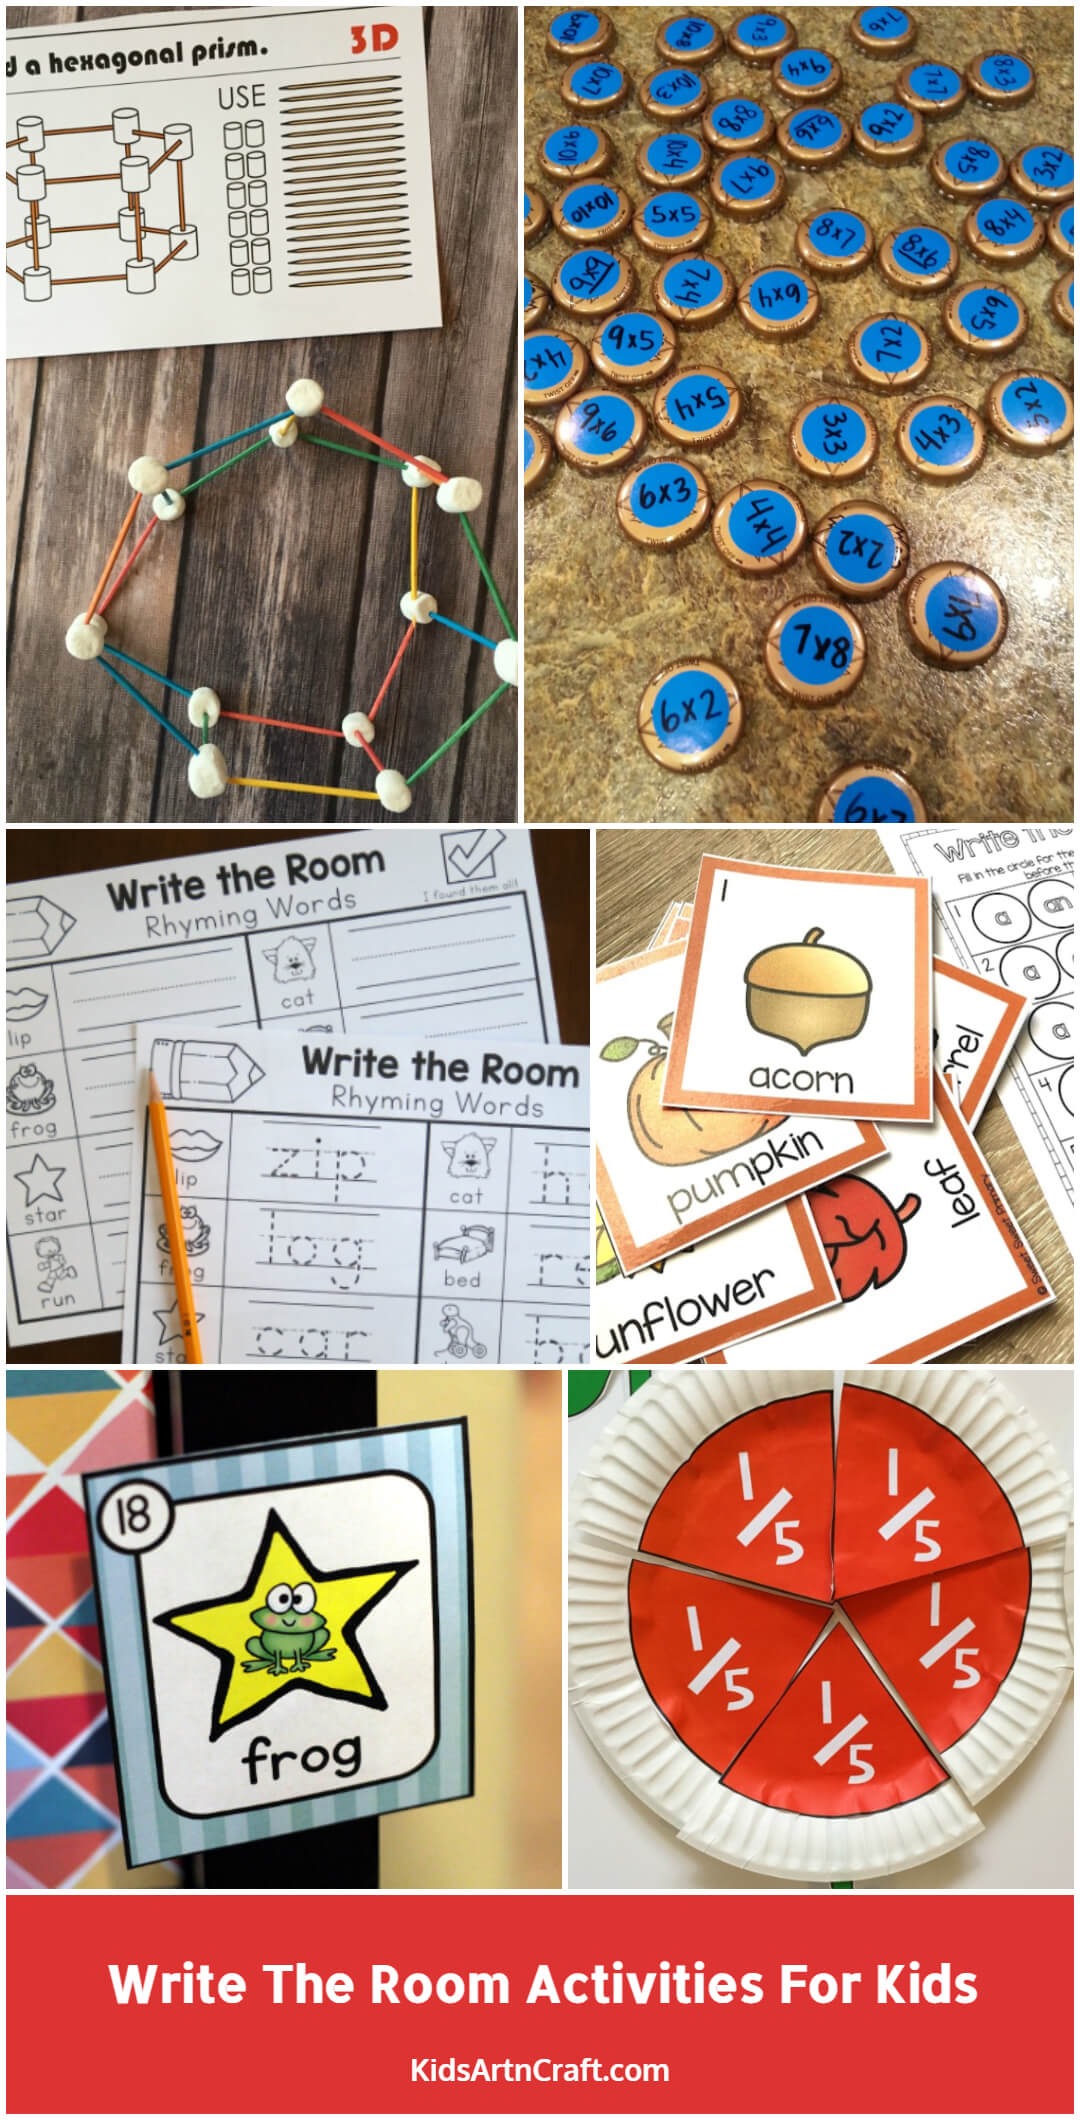 Write The Room Activities for Kids